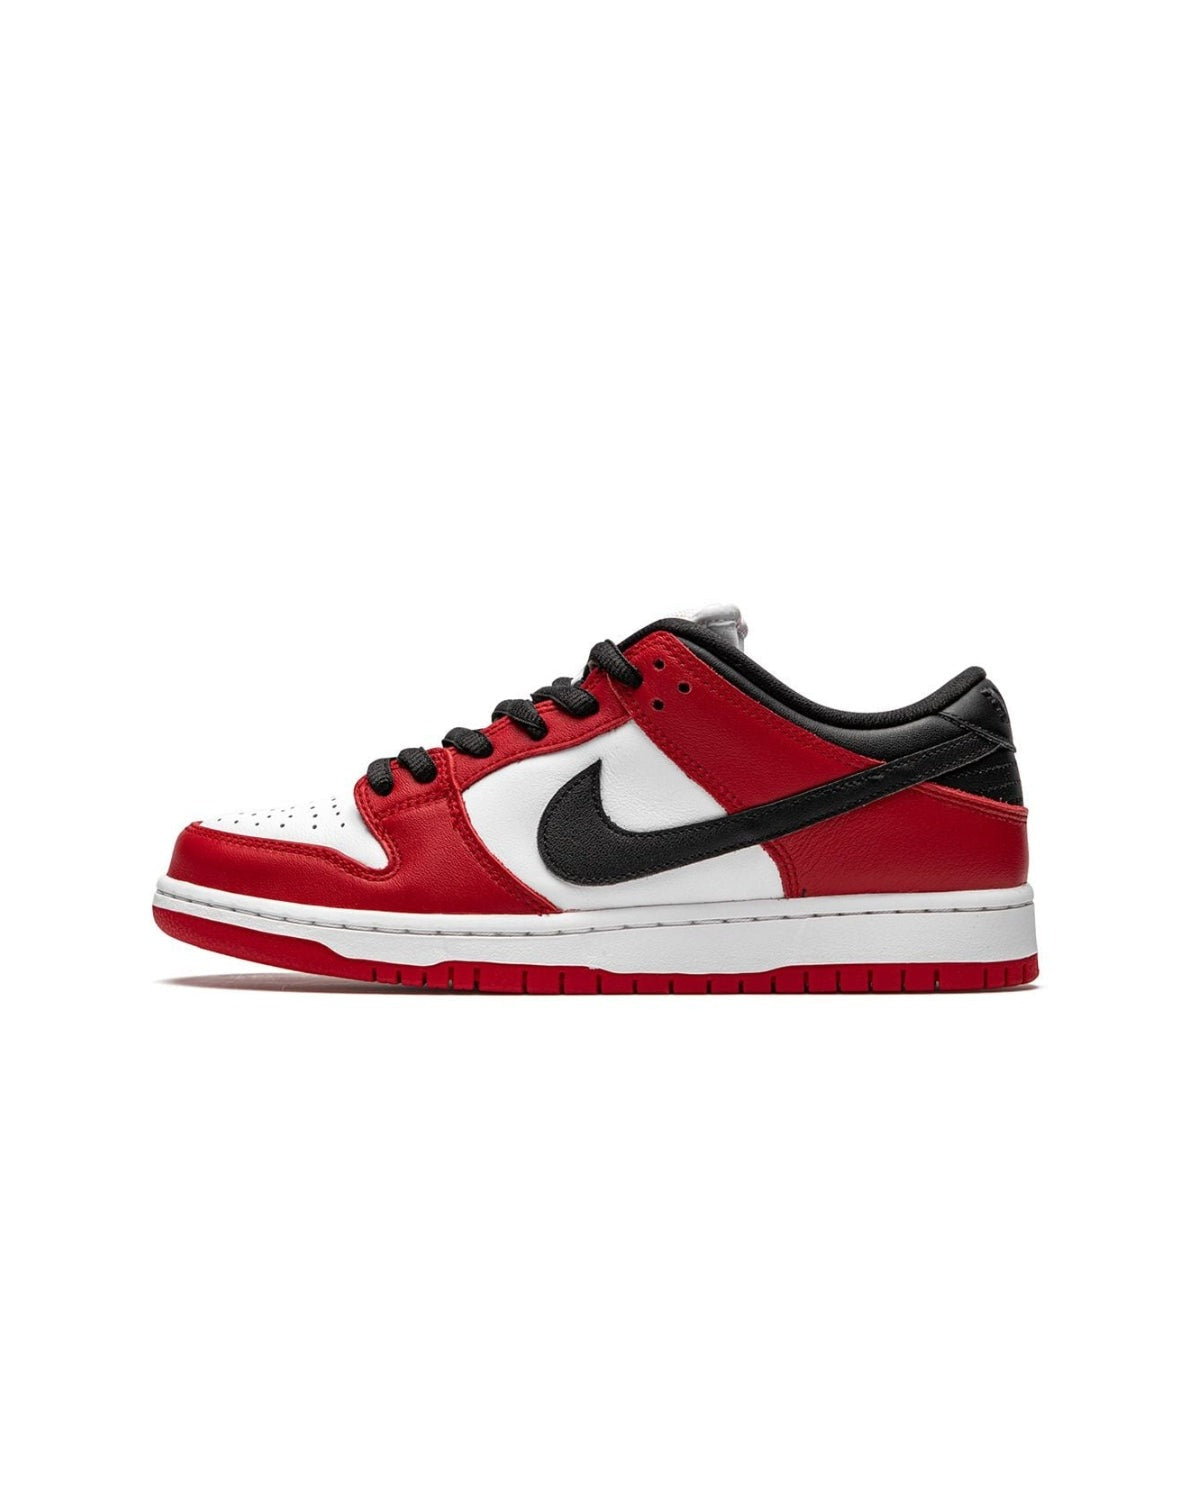 SB Dunk Low Pro "Chicago" sneakers